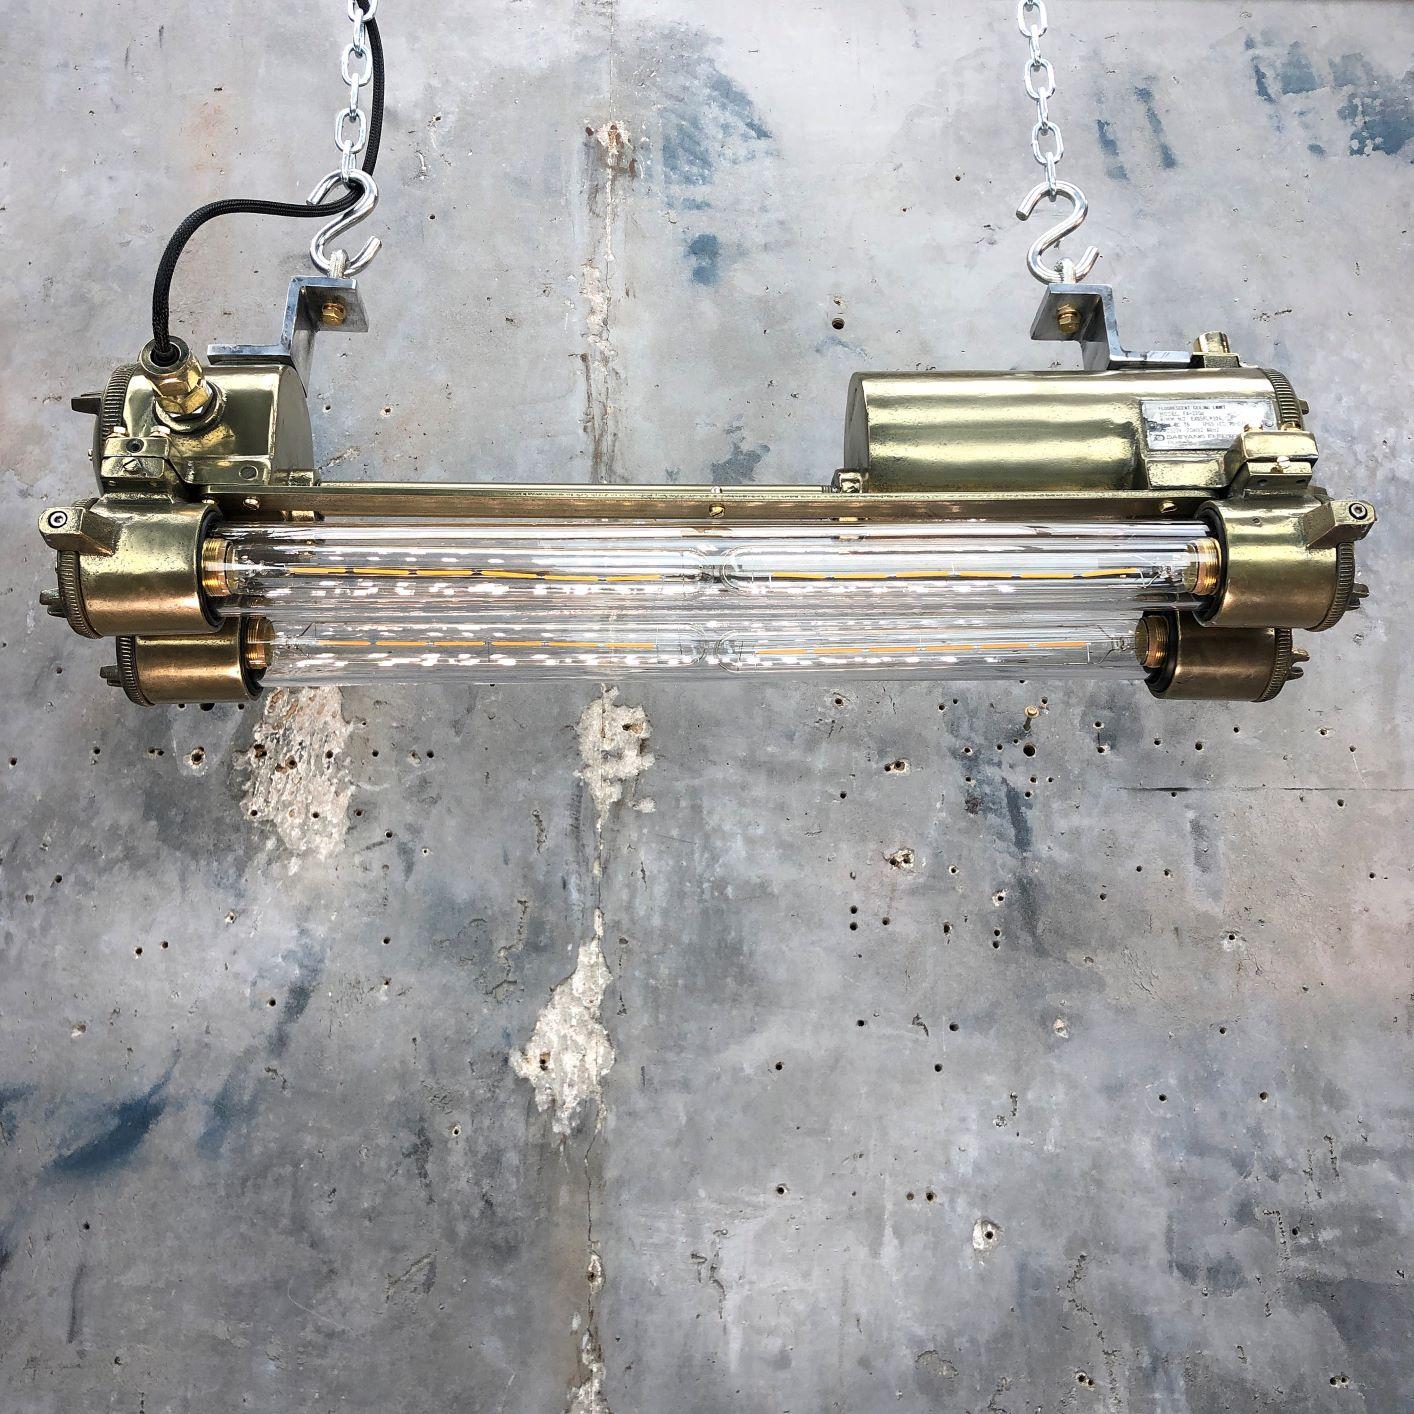 A vintage industrial Korean flameproof striplight made by Daeyang in the 1970s with brass veneer finishing.
 
A reclaimed item originally from super tankers and military vessels then professionally restored in-house by Looml ight in the UK ready